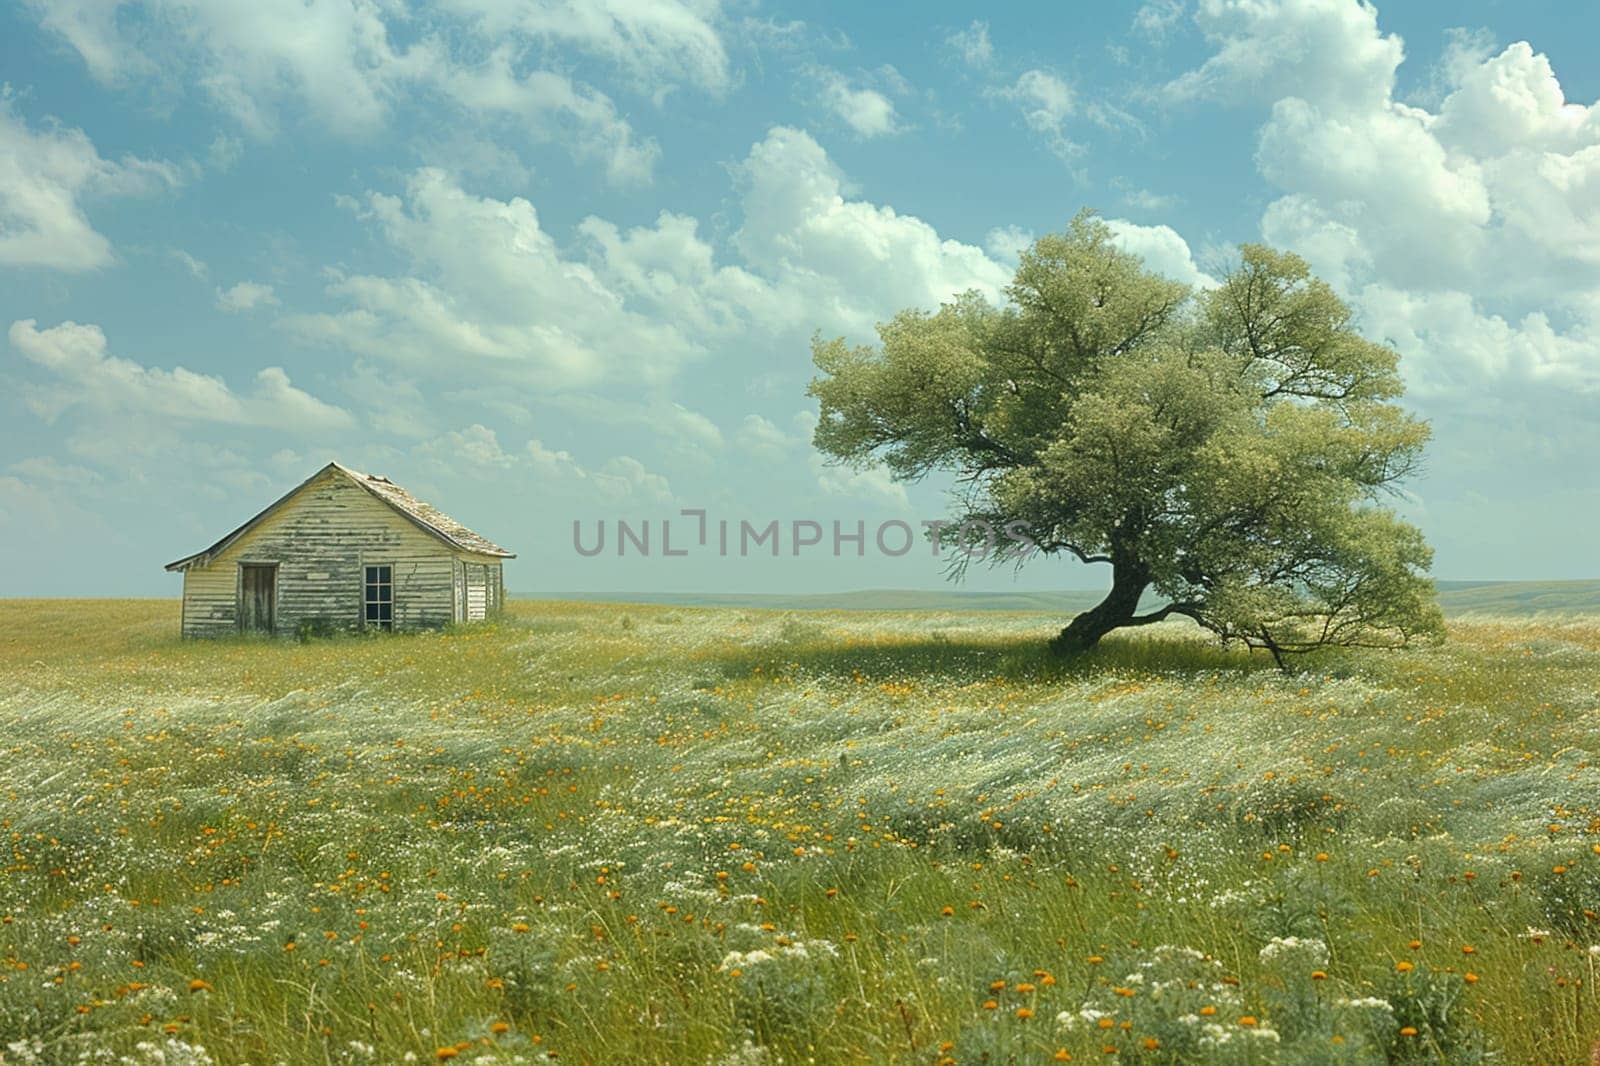 Windswept Prairie with a Lone Cottonwood Tree, The branches blur with the grass, a dance of life in the open expanse.